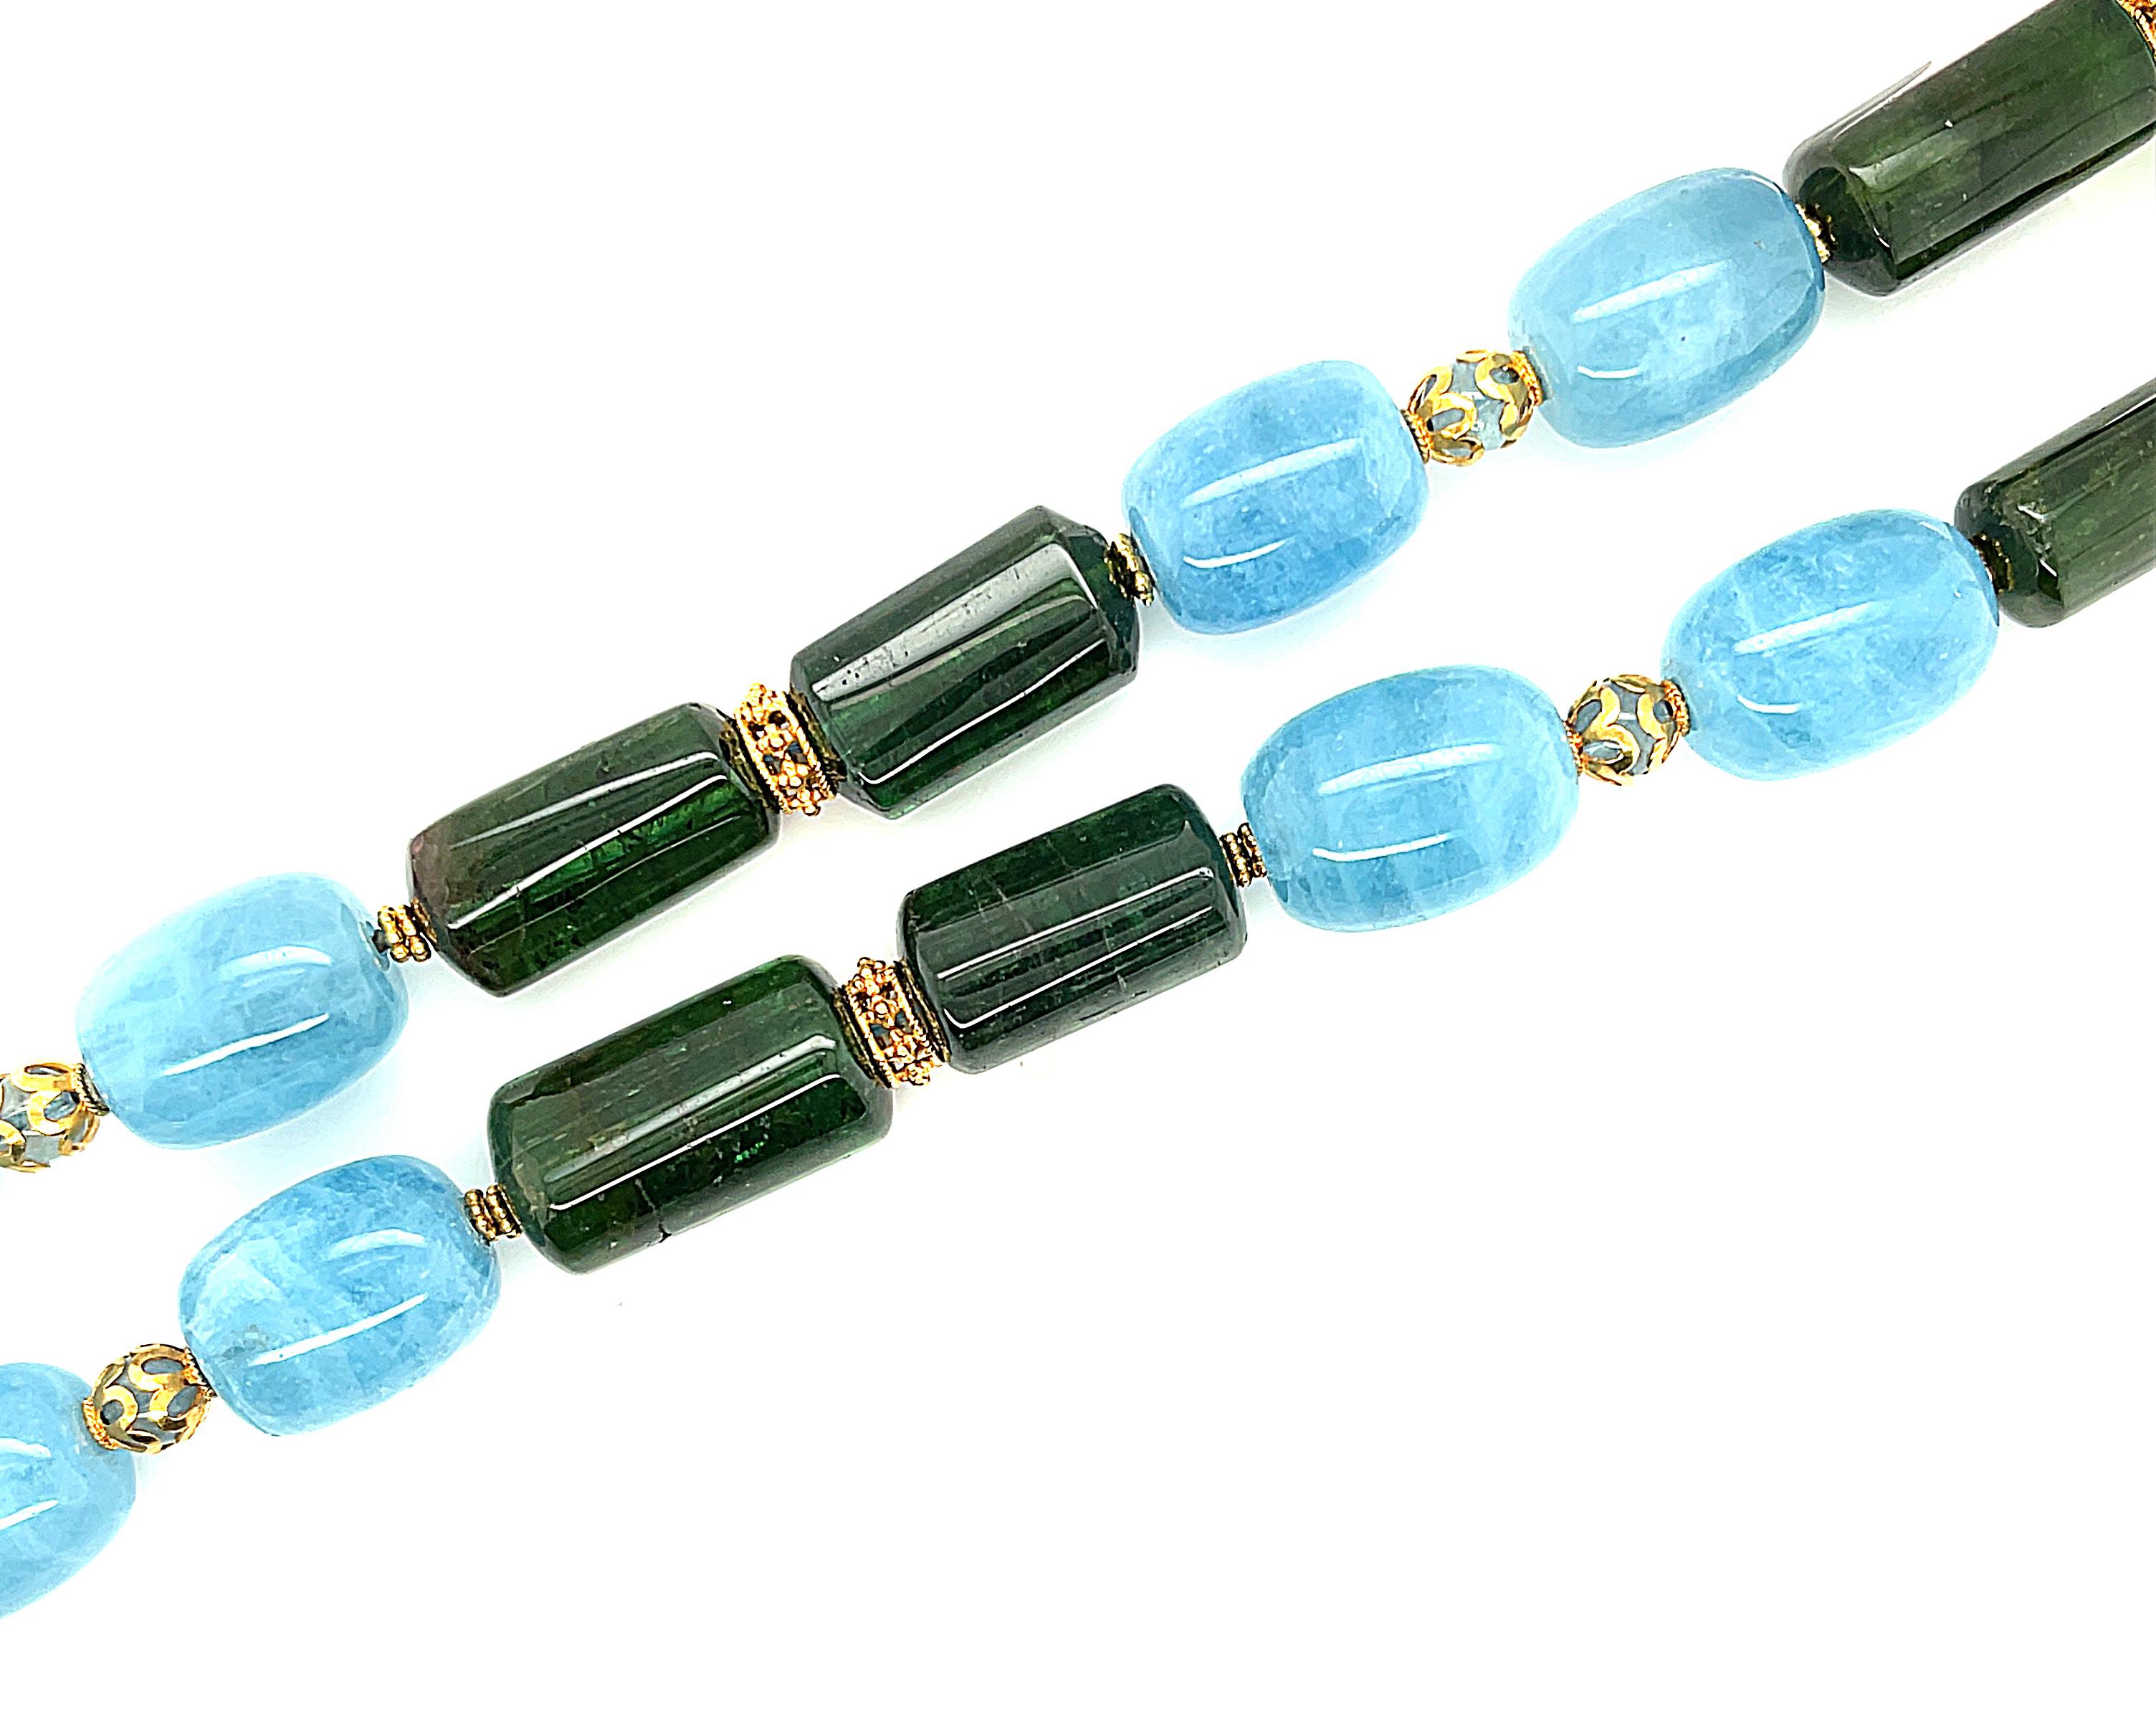 Artisan Aquamarine and Tourmaline Barrel Shaped Bead Necklace with Yellow Gold Accents